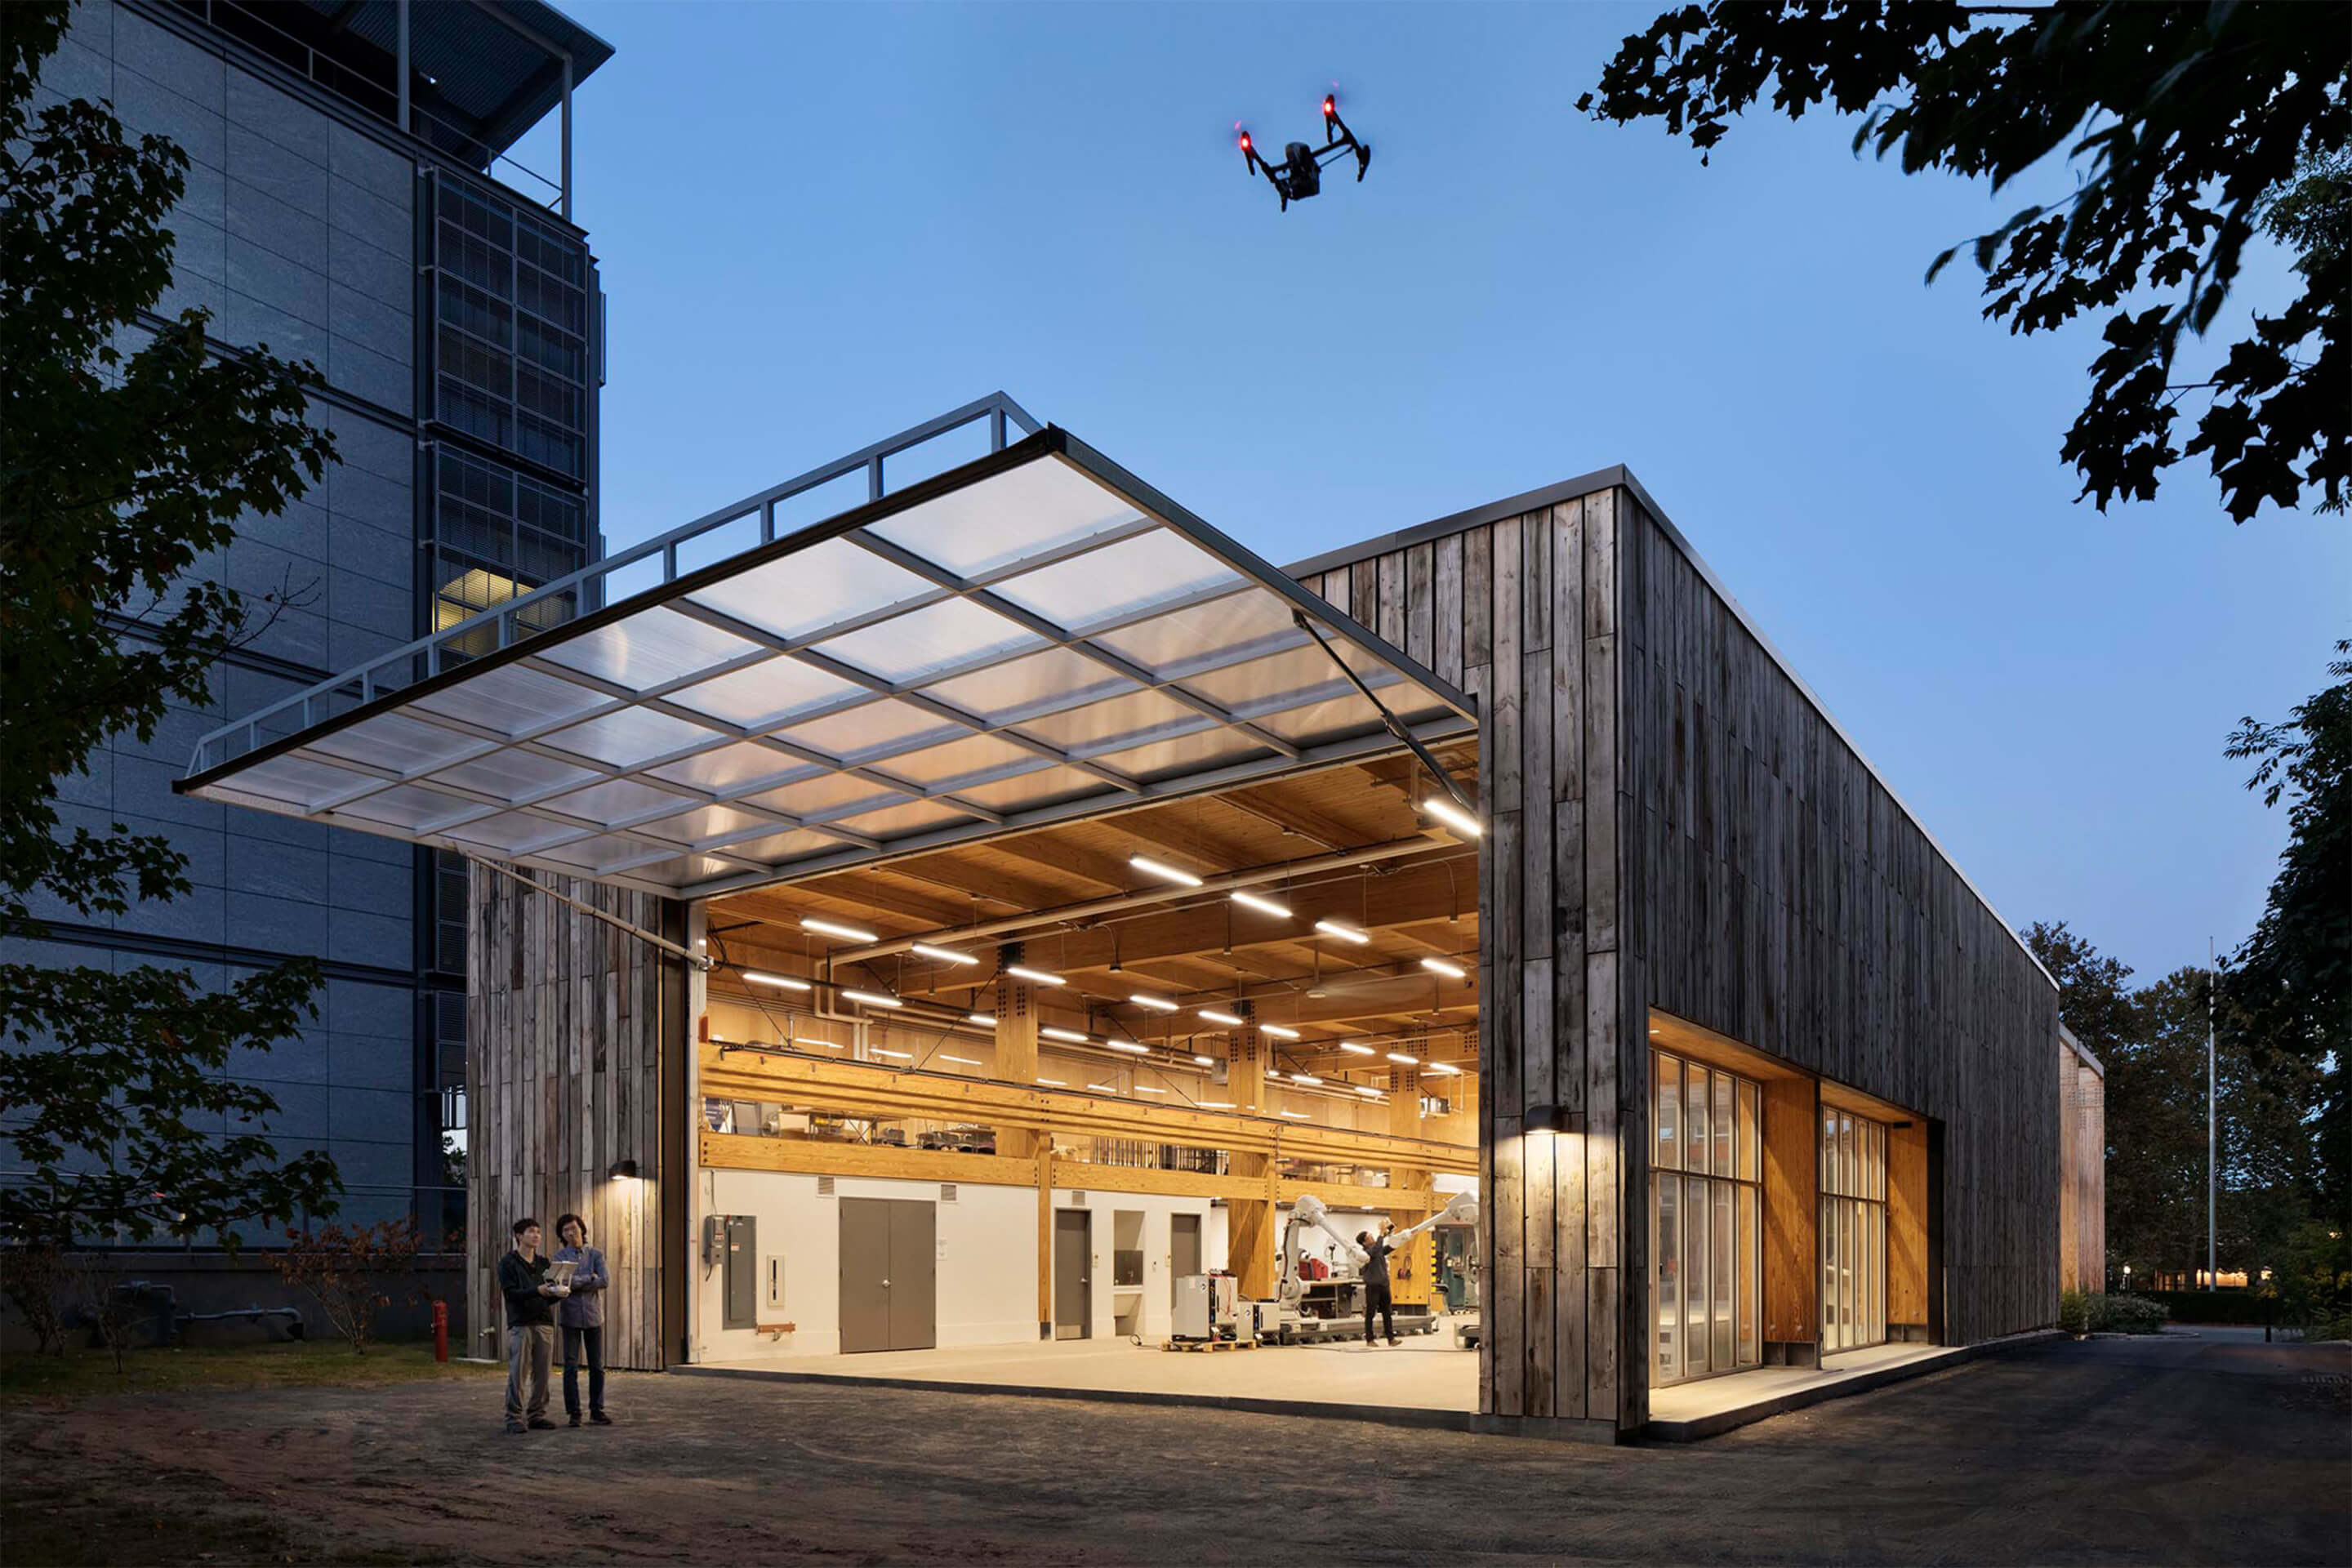 photograph depicting a shedlike structure with an open garage door and drone in the foreground